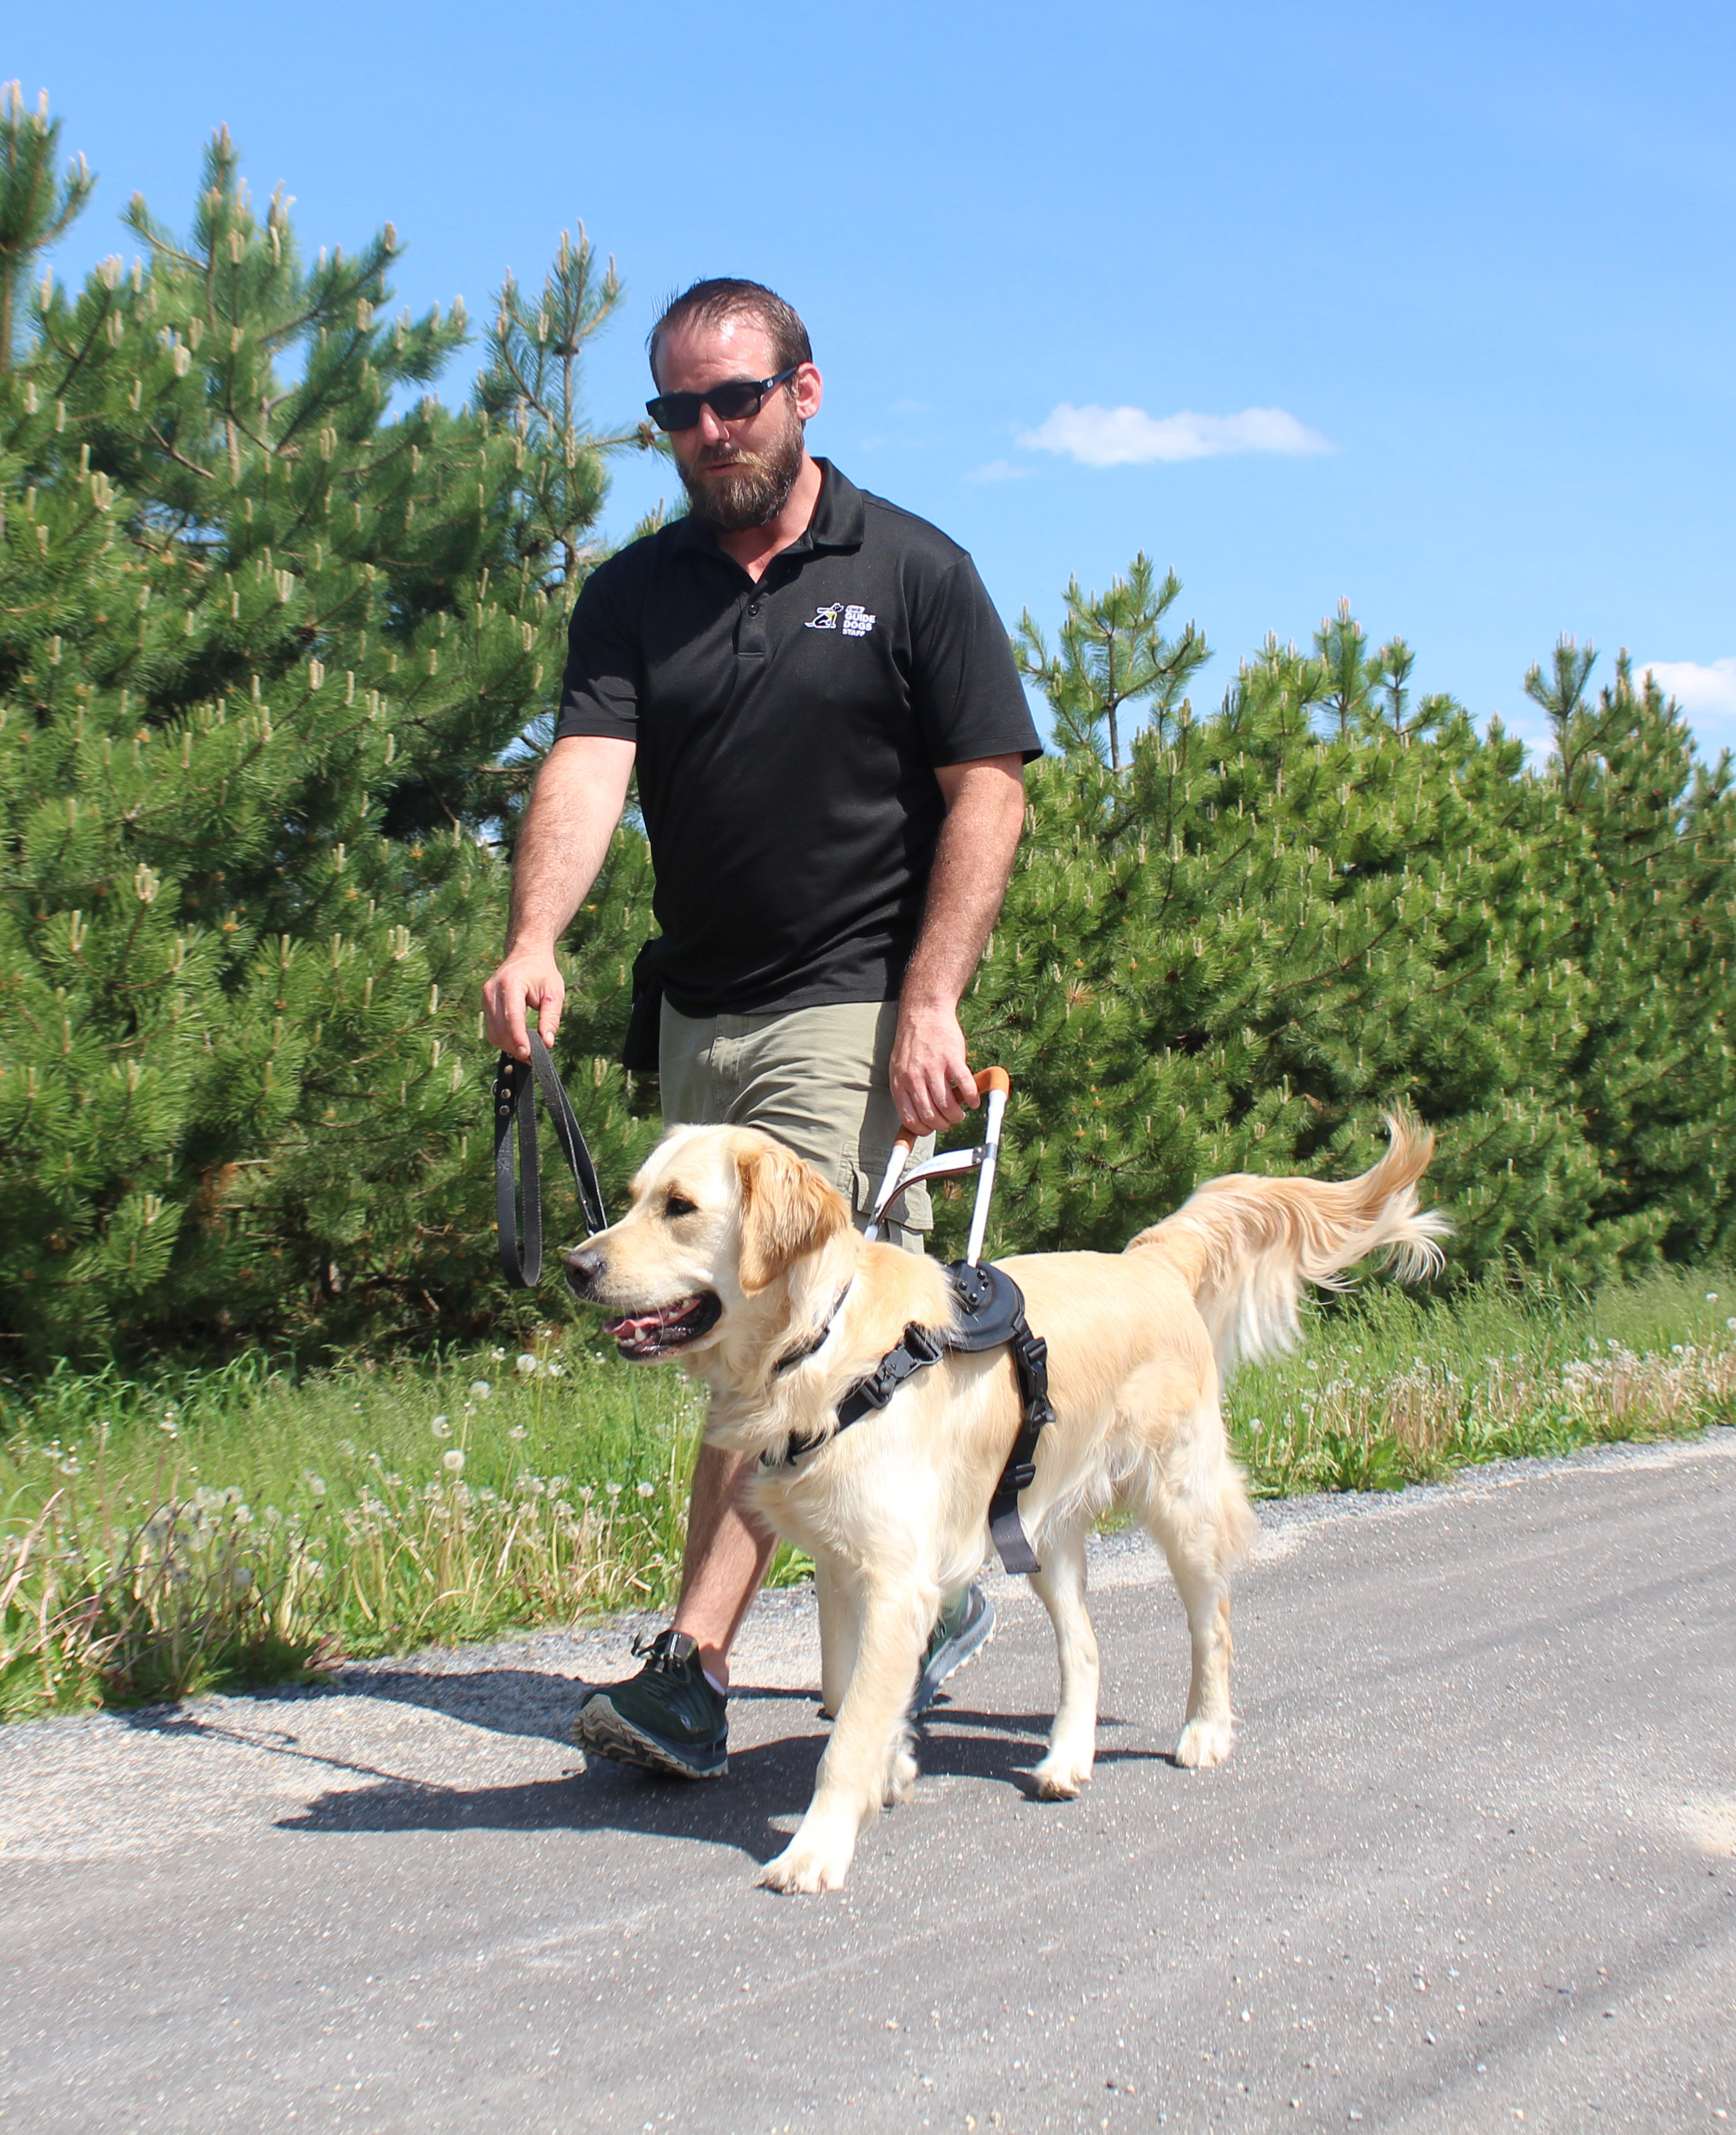 : Rob walking down the road on a sunny day, holding onto the harness of Cody, a CNIB Guide Dog.